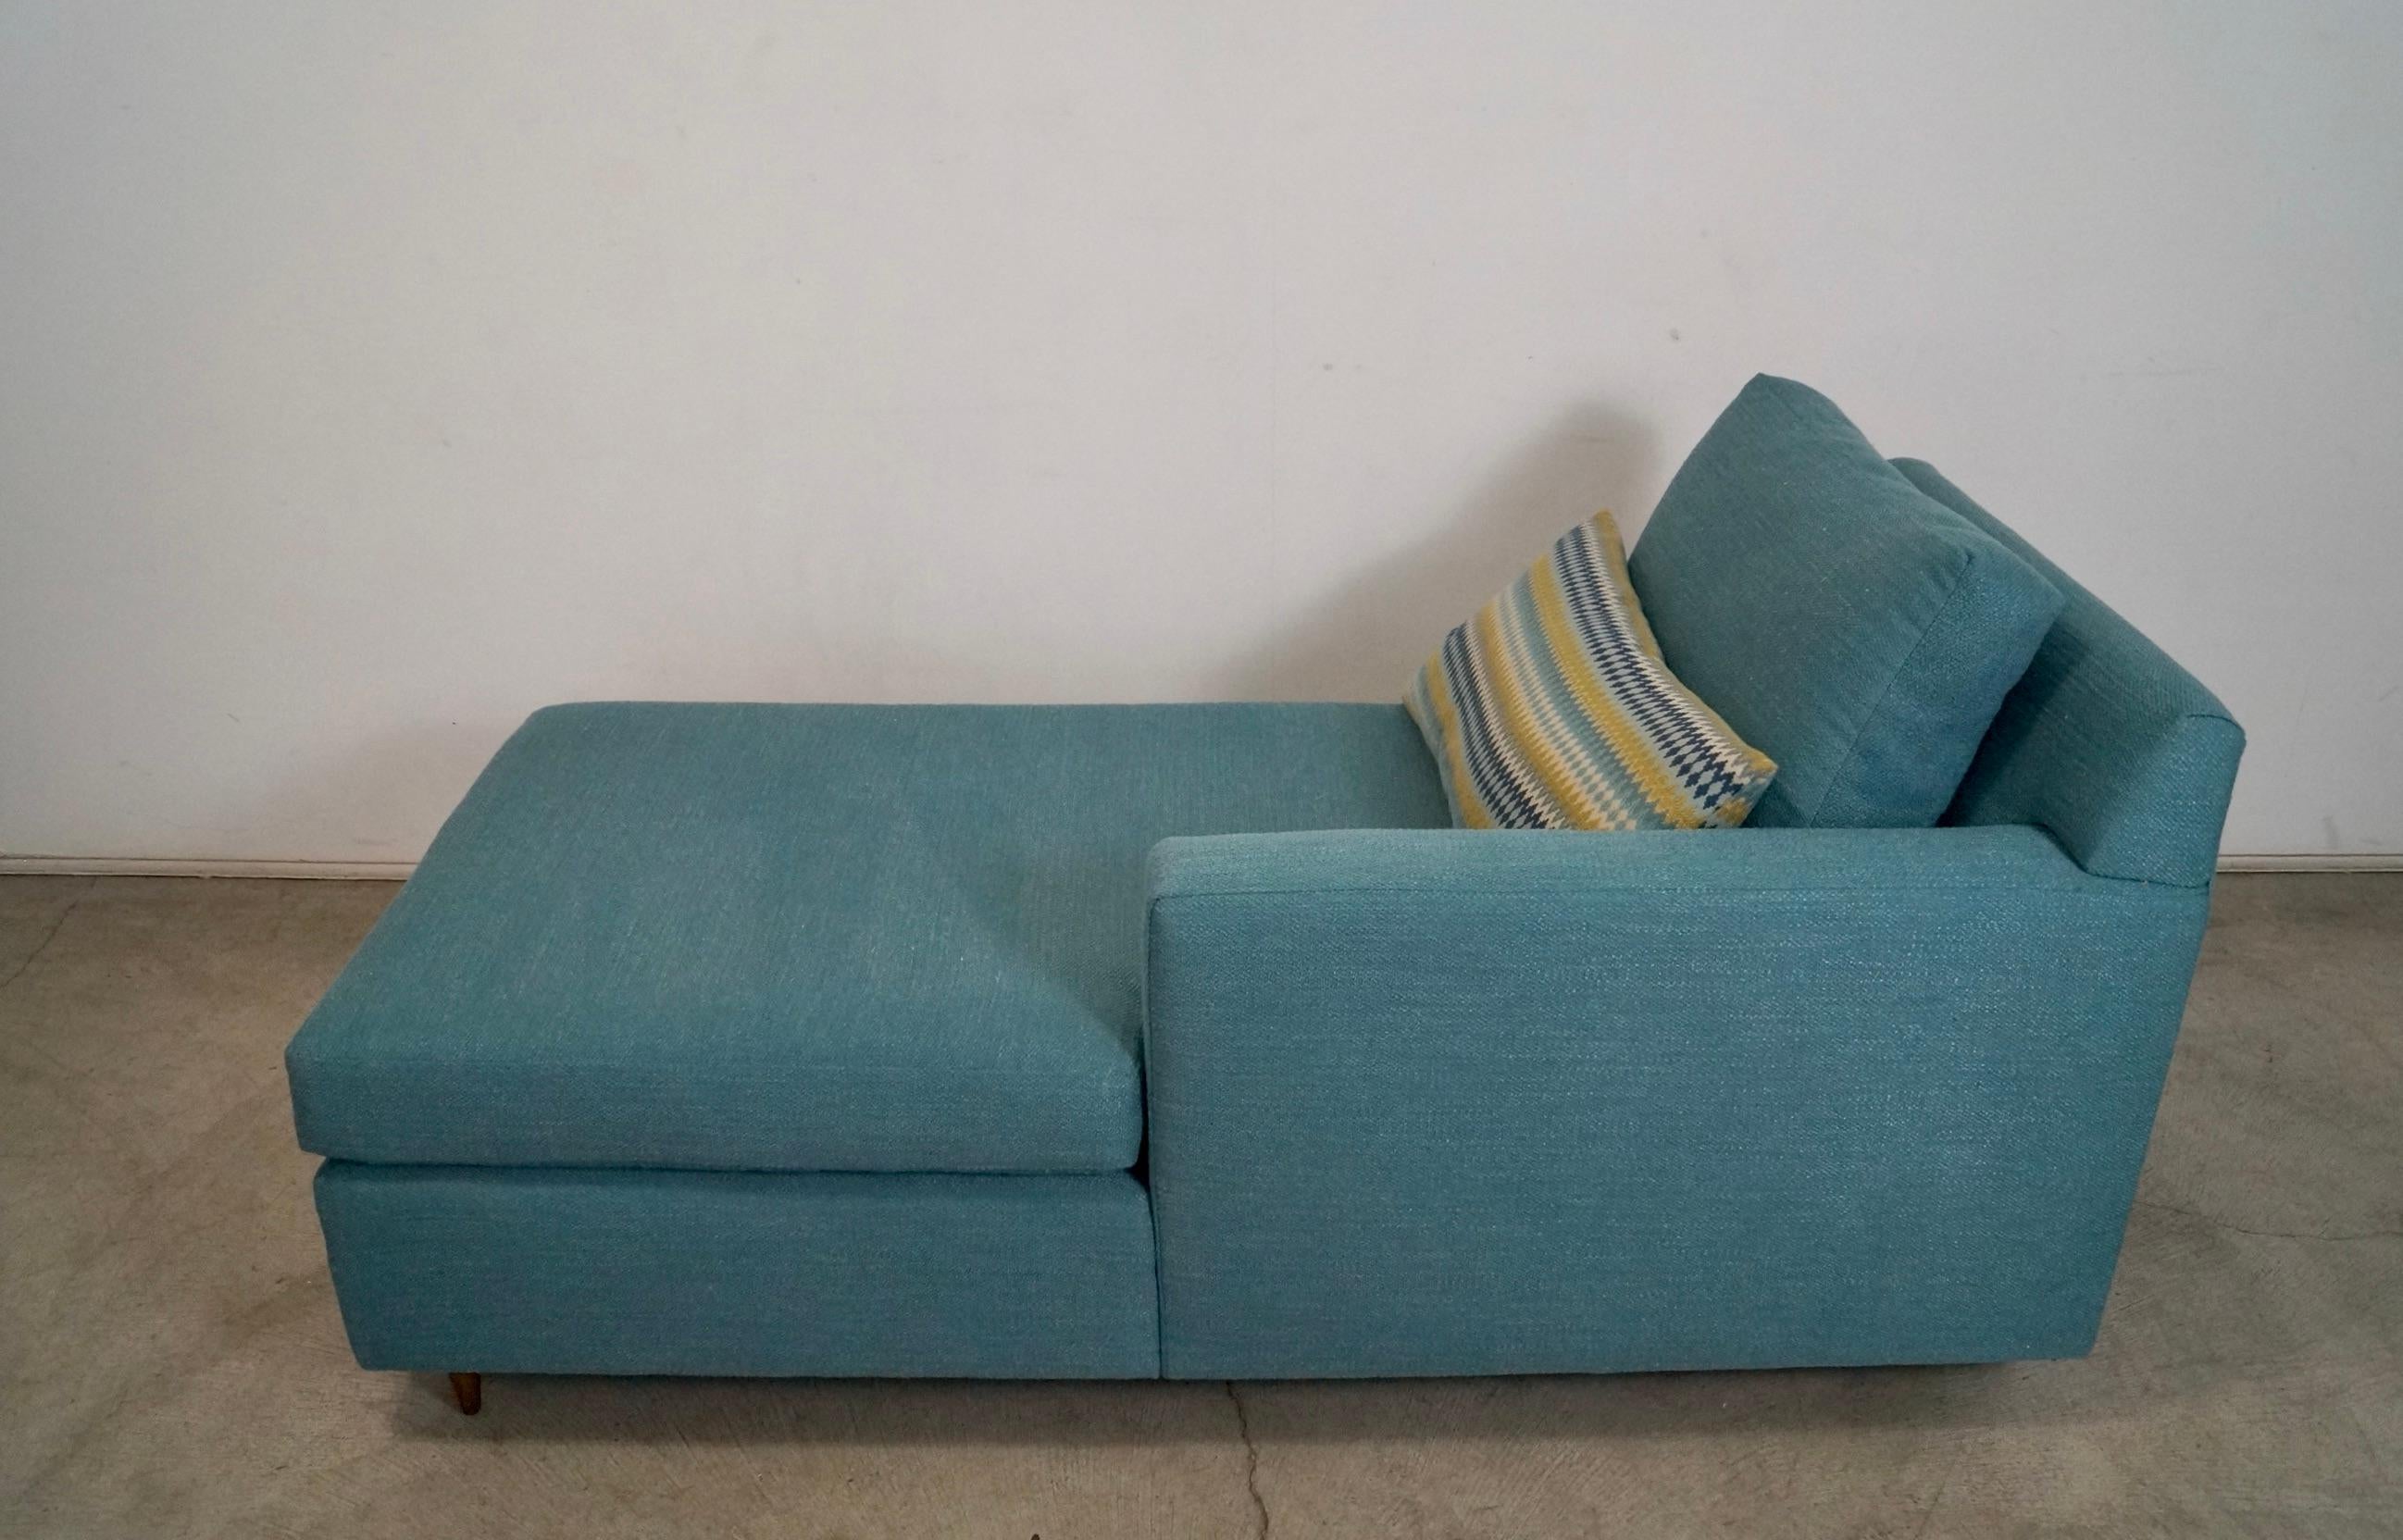 1970's Mid-Century Modern Single Arm Reupholstered Chaise Lounge Daybed For Sale 3